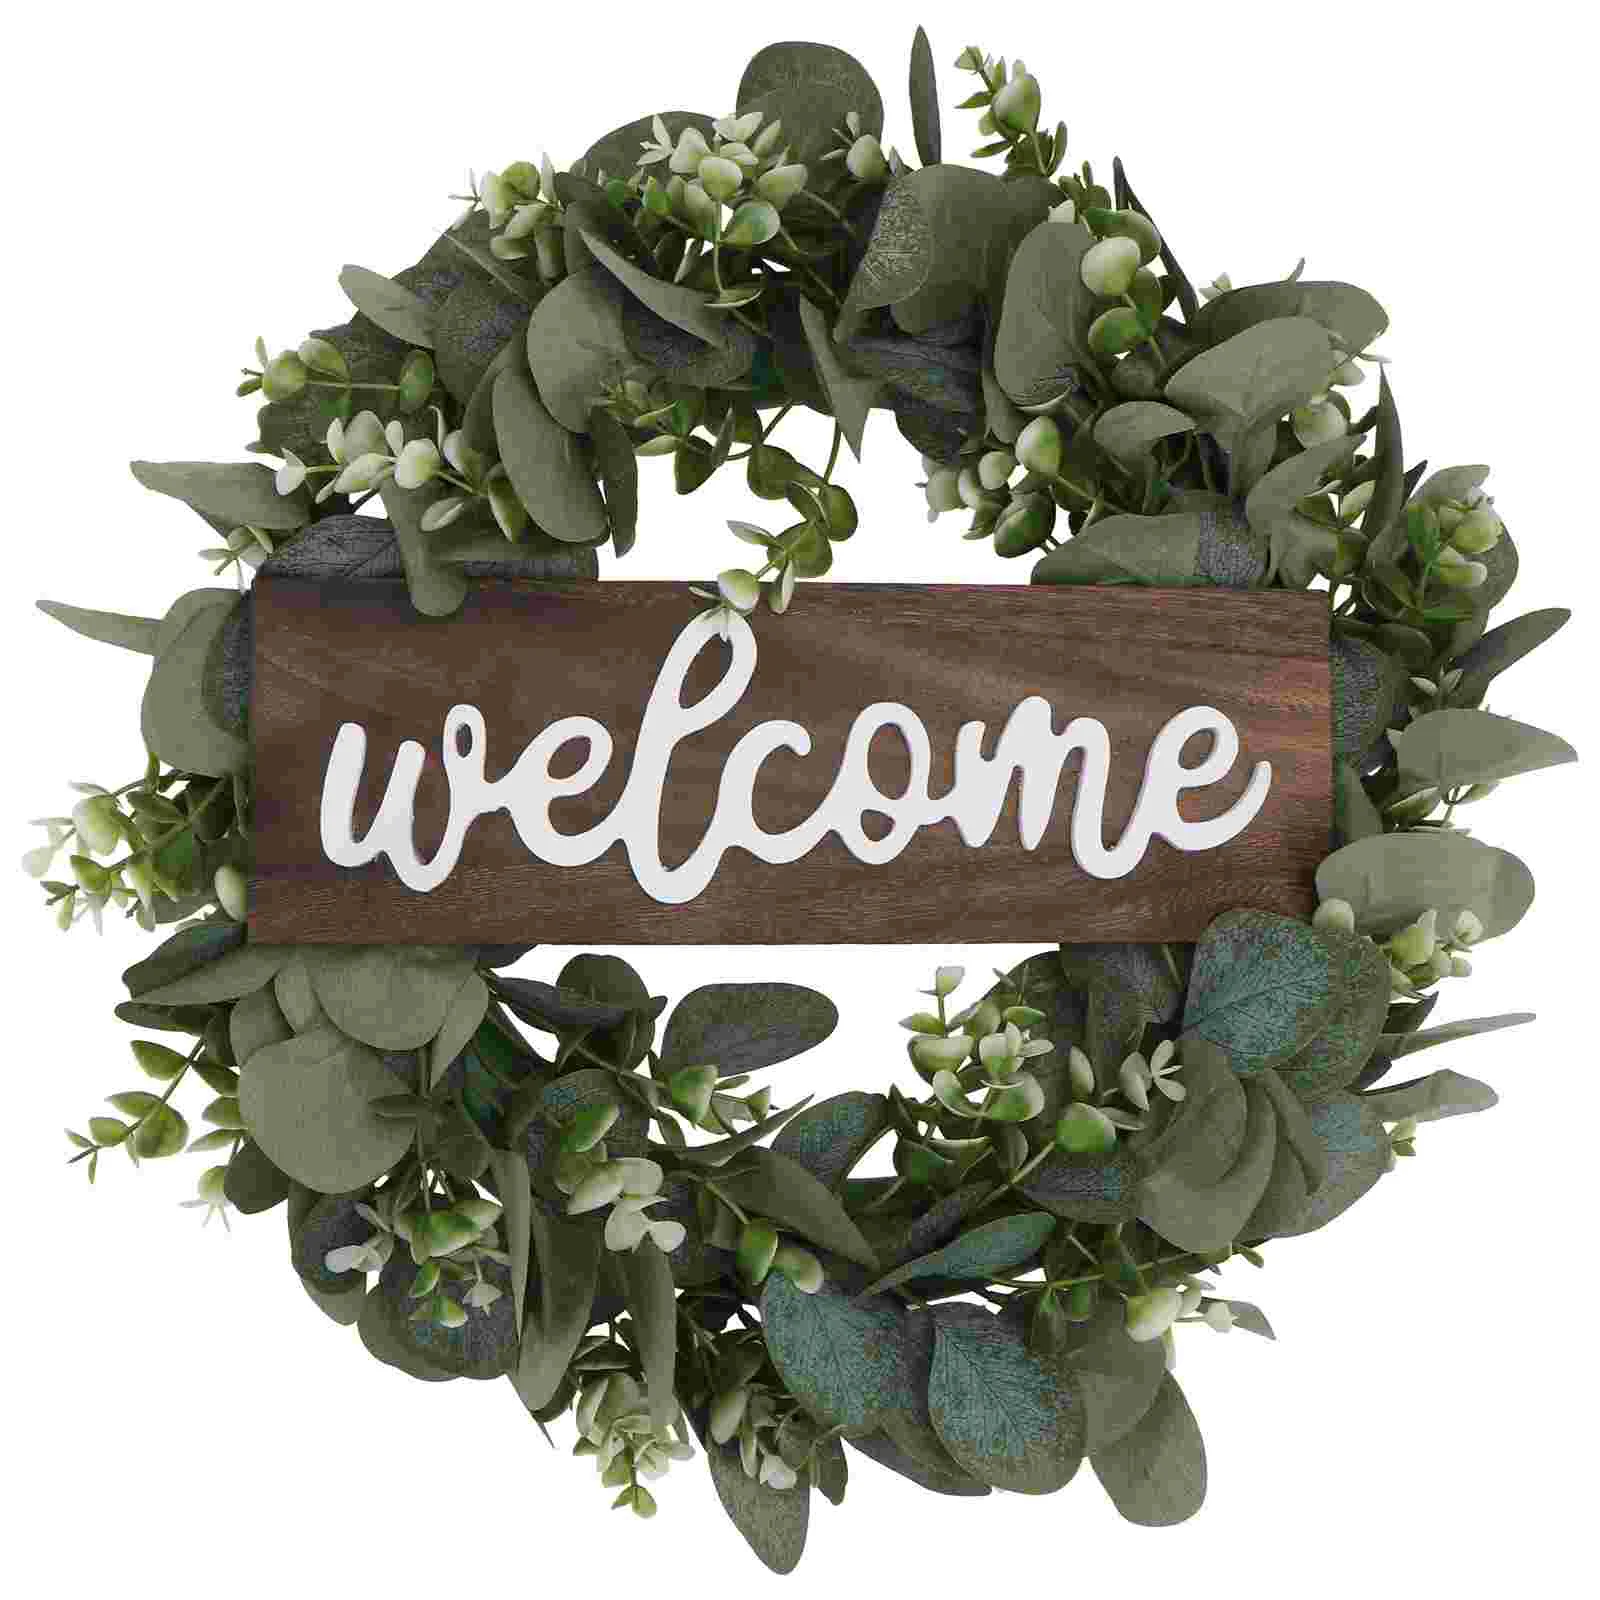 

Wreath Eucalyptus Door Welcome Easter Wreaths Farmhouse Spring Sign Front Summer Greenery Faux Leaves Garland Rustic Decor Wood